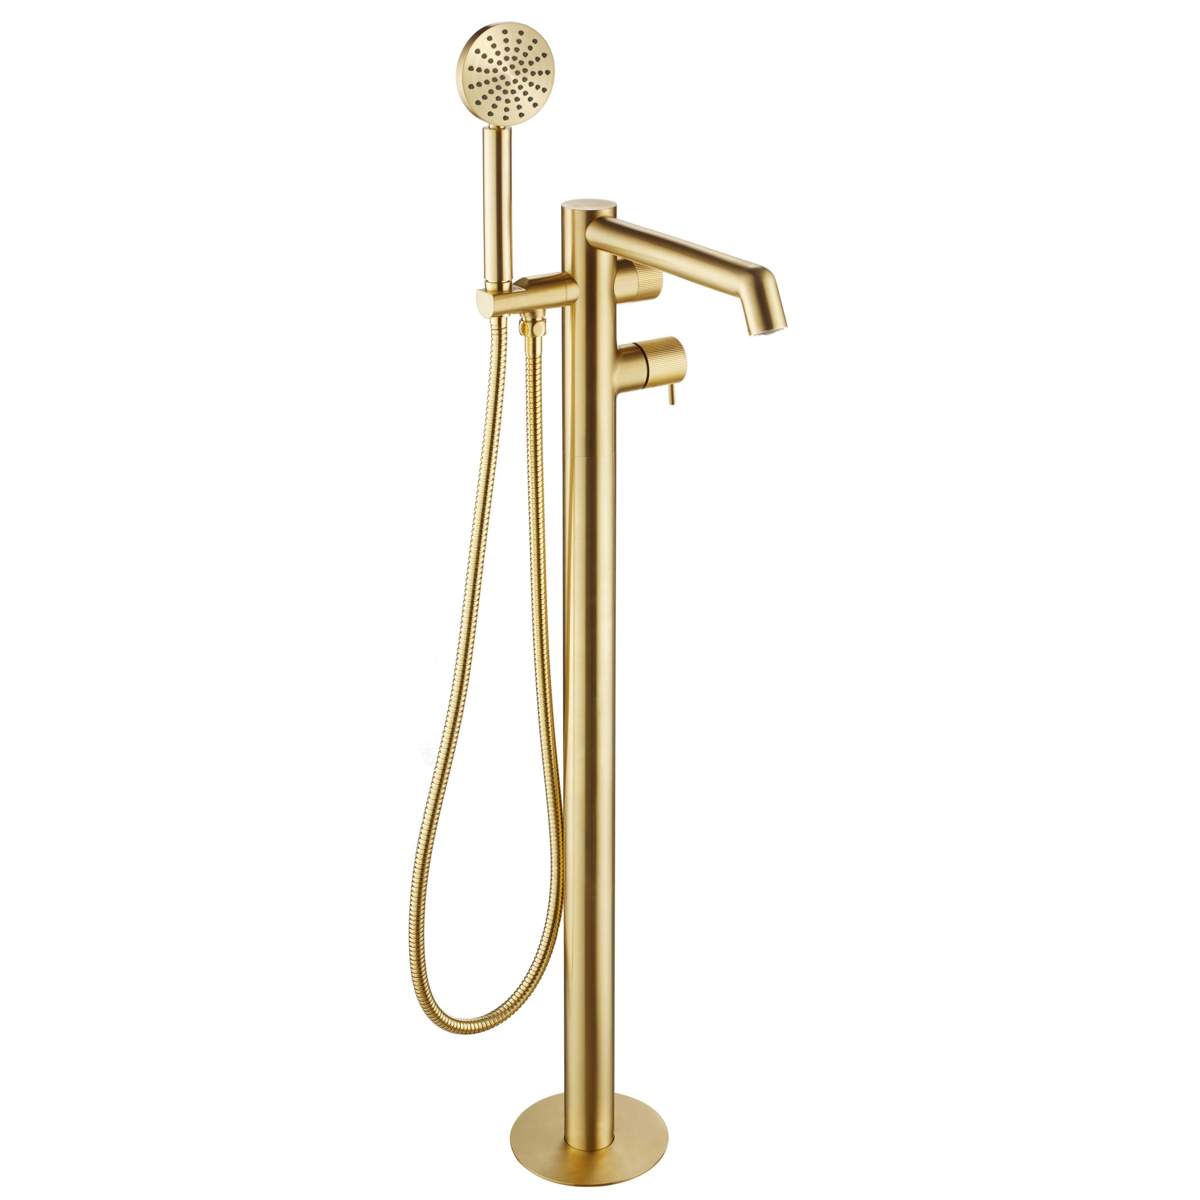 JTP Evo Brushed Brass Floor Standing Bath Shower Mixer with Lever and Kit (LH63534BBR)